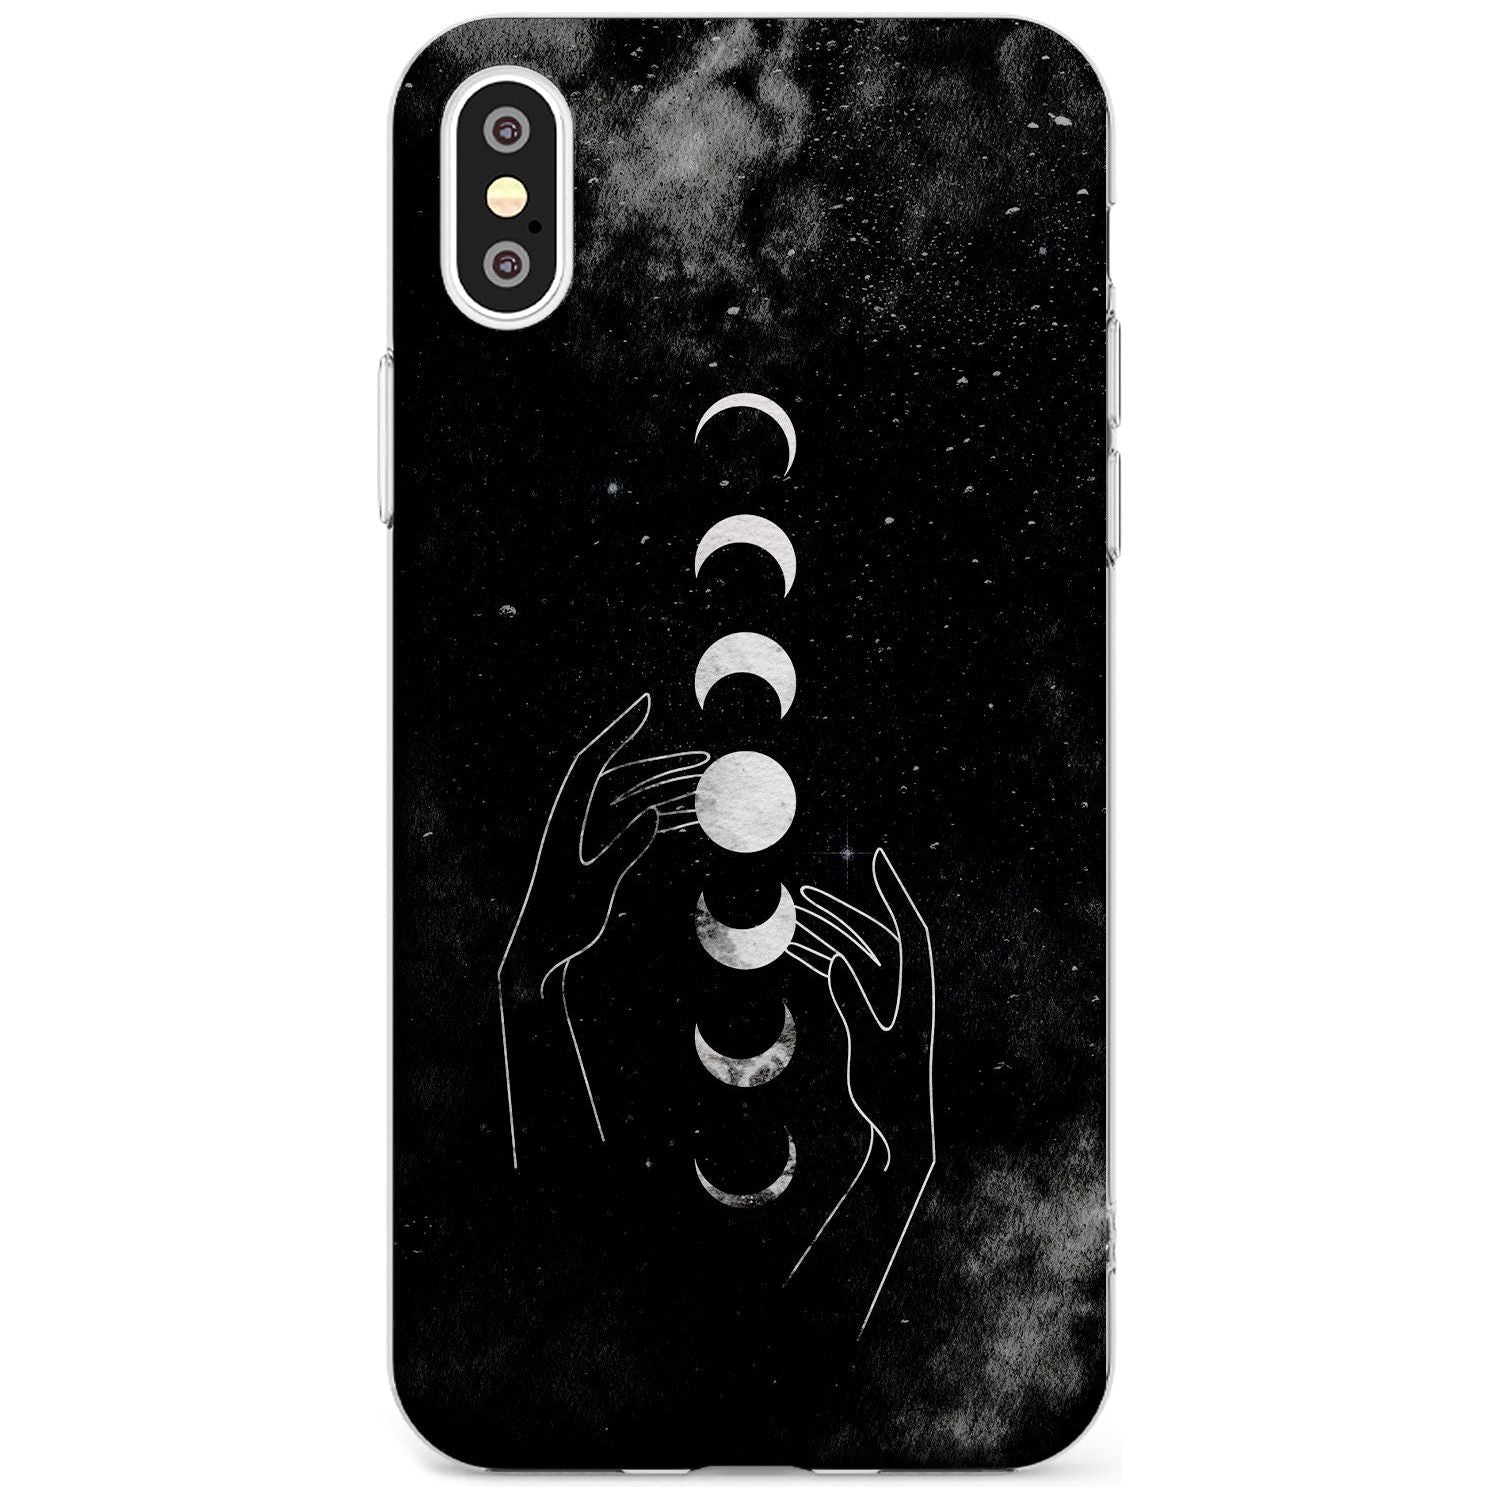 Moon Phases and Hands Slim TPU Phone Case Warehouse X XS Max XR